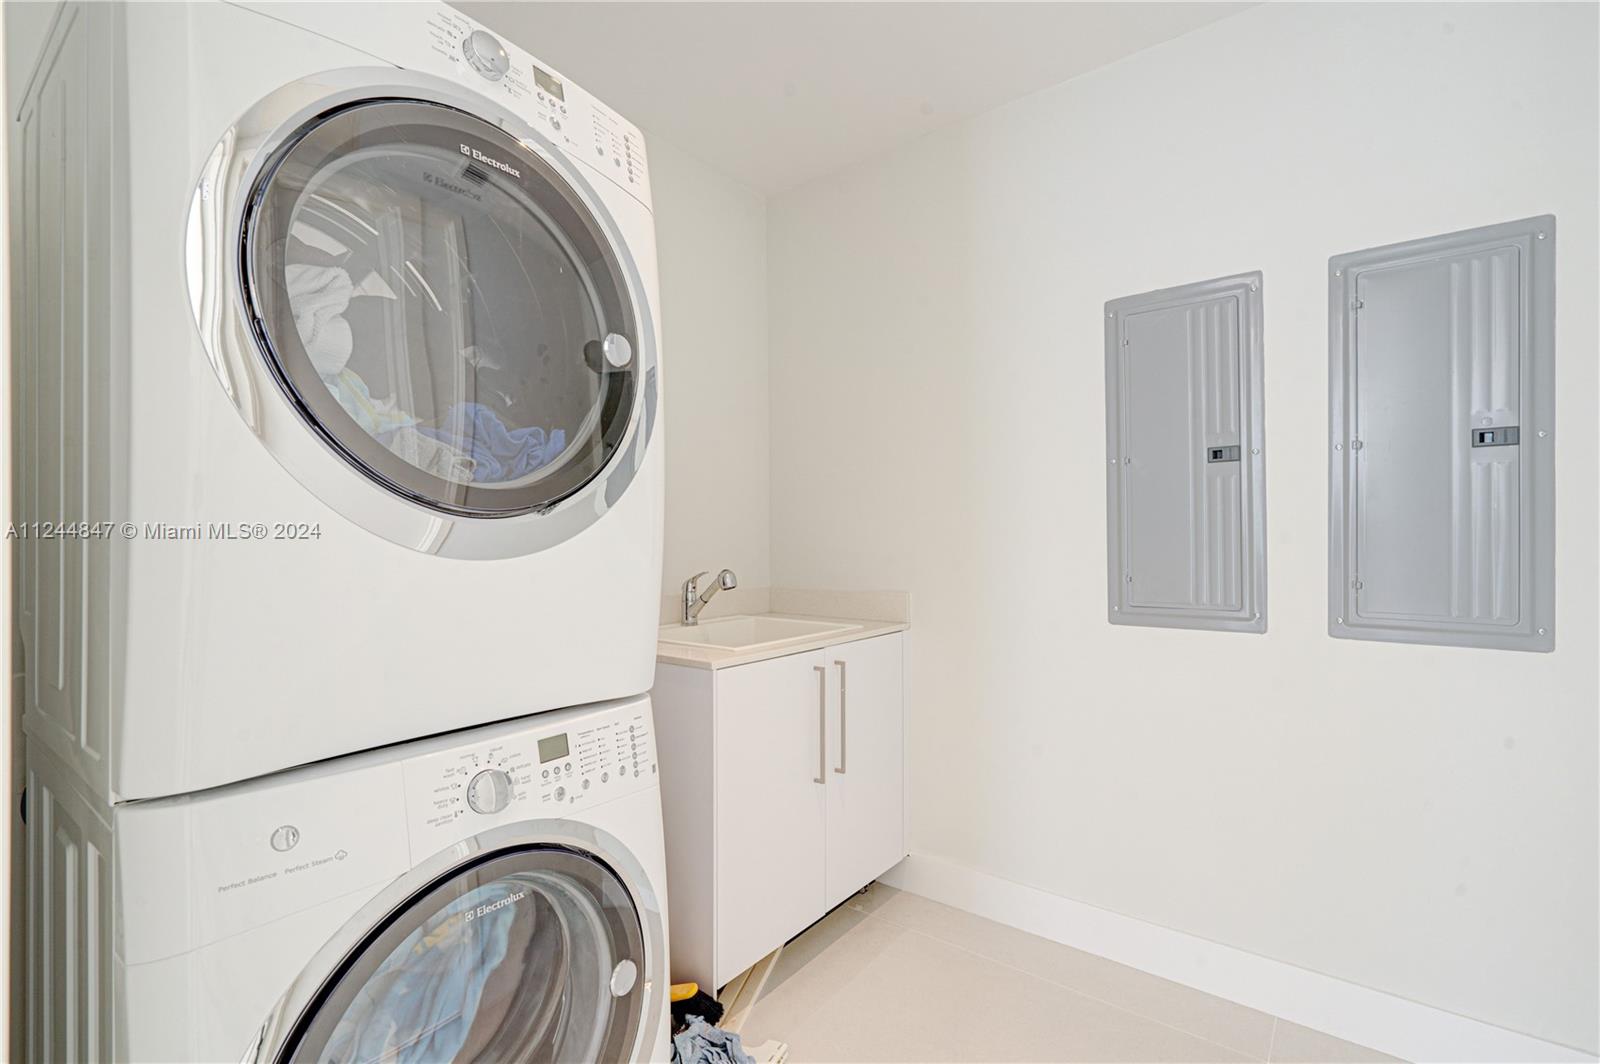 LAUNDRY ROOM
ELECTROLUX WASHER & DRYER COMBO